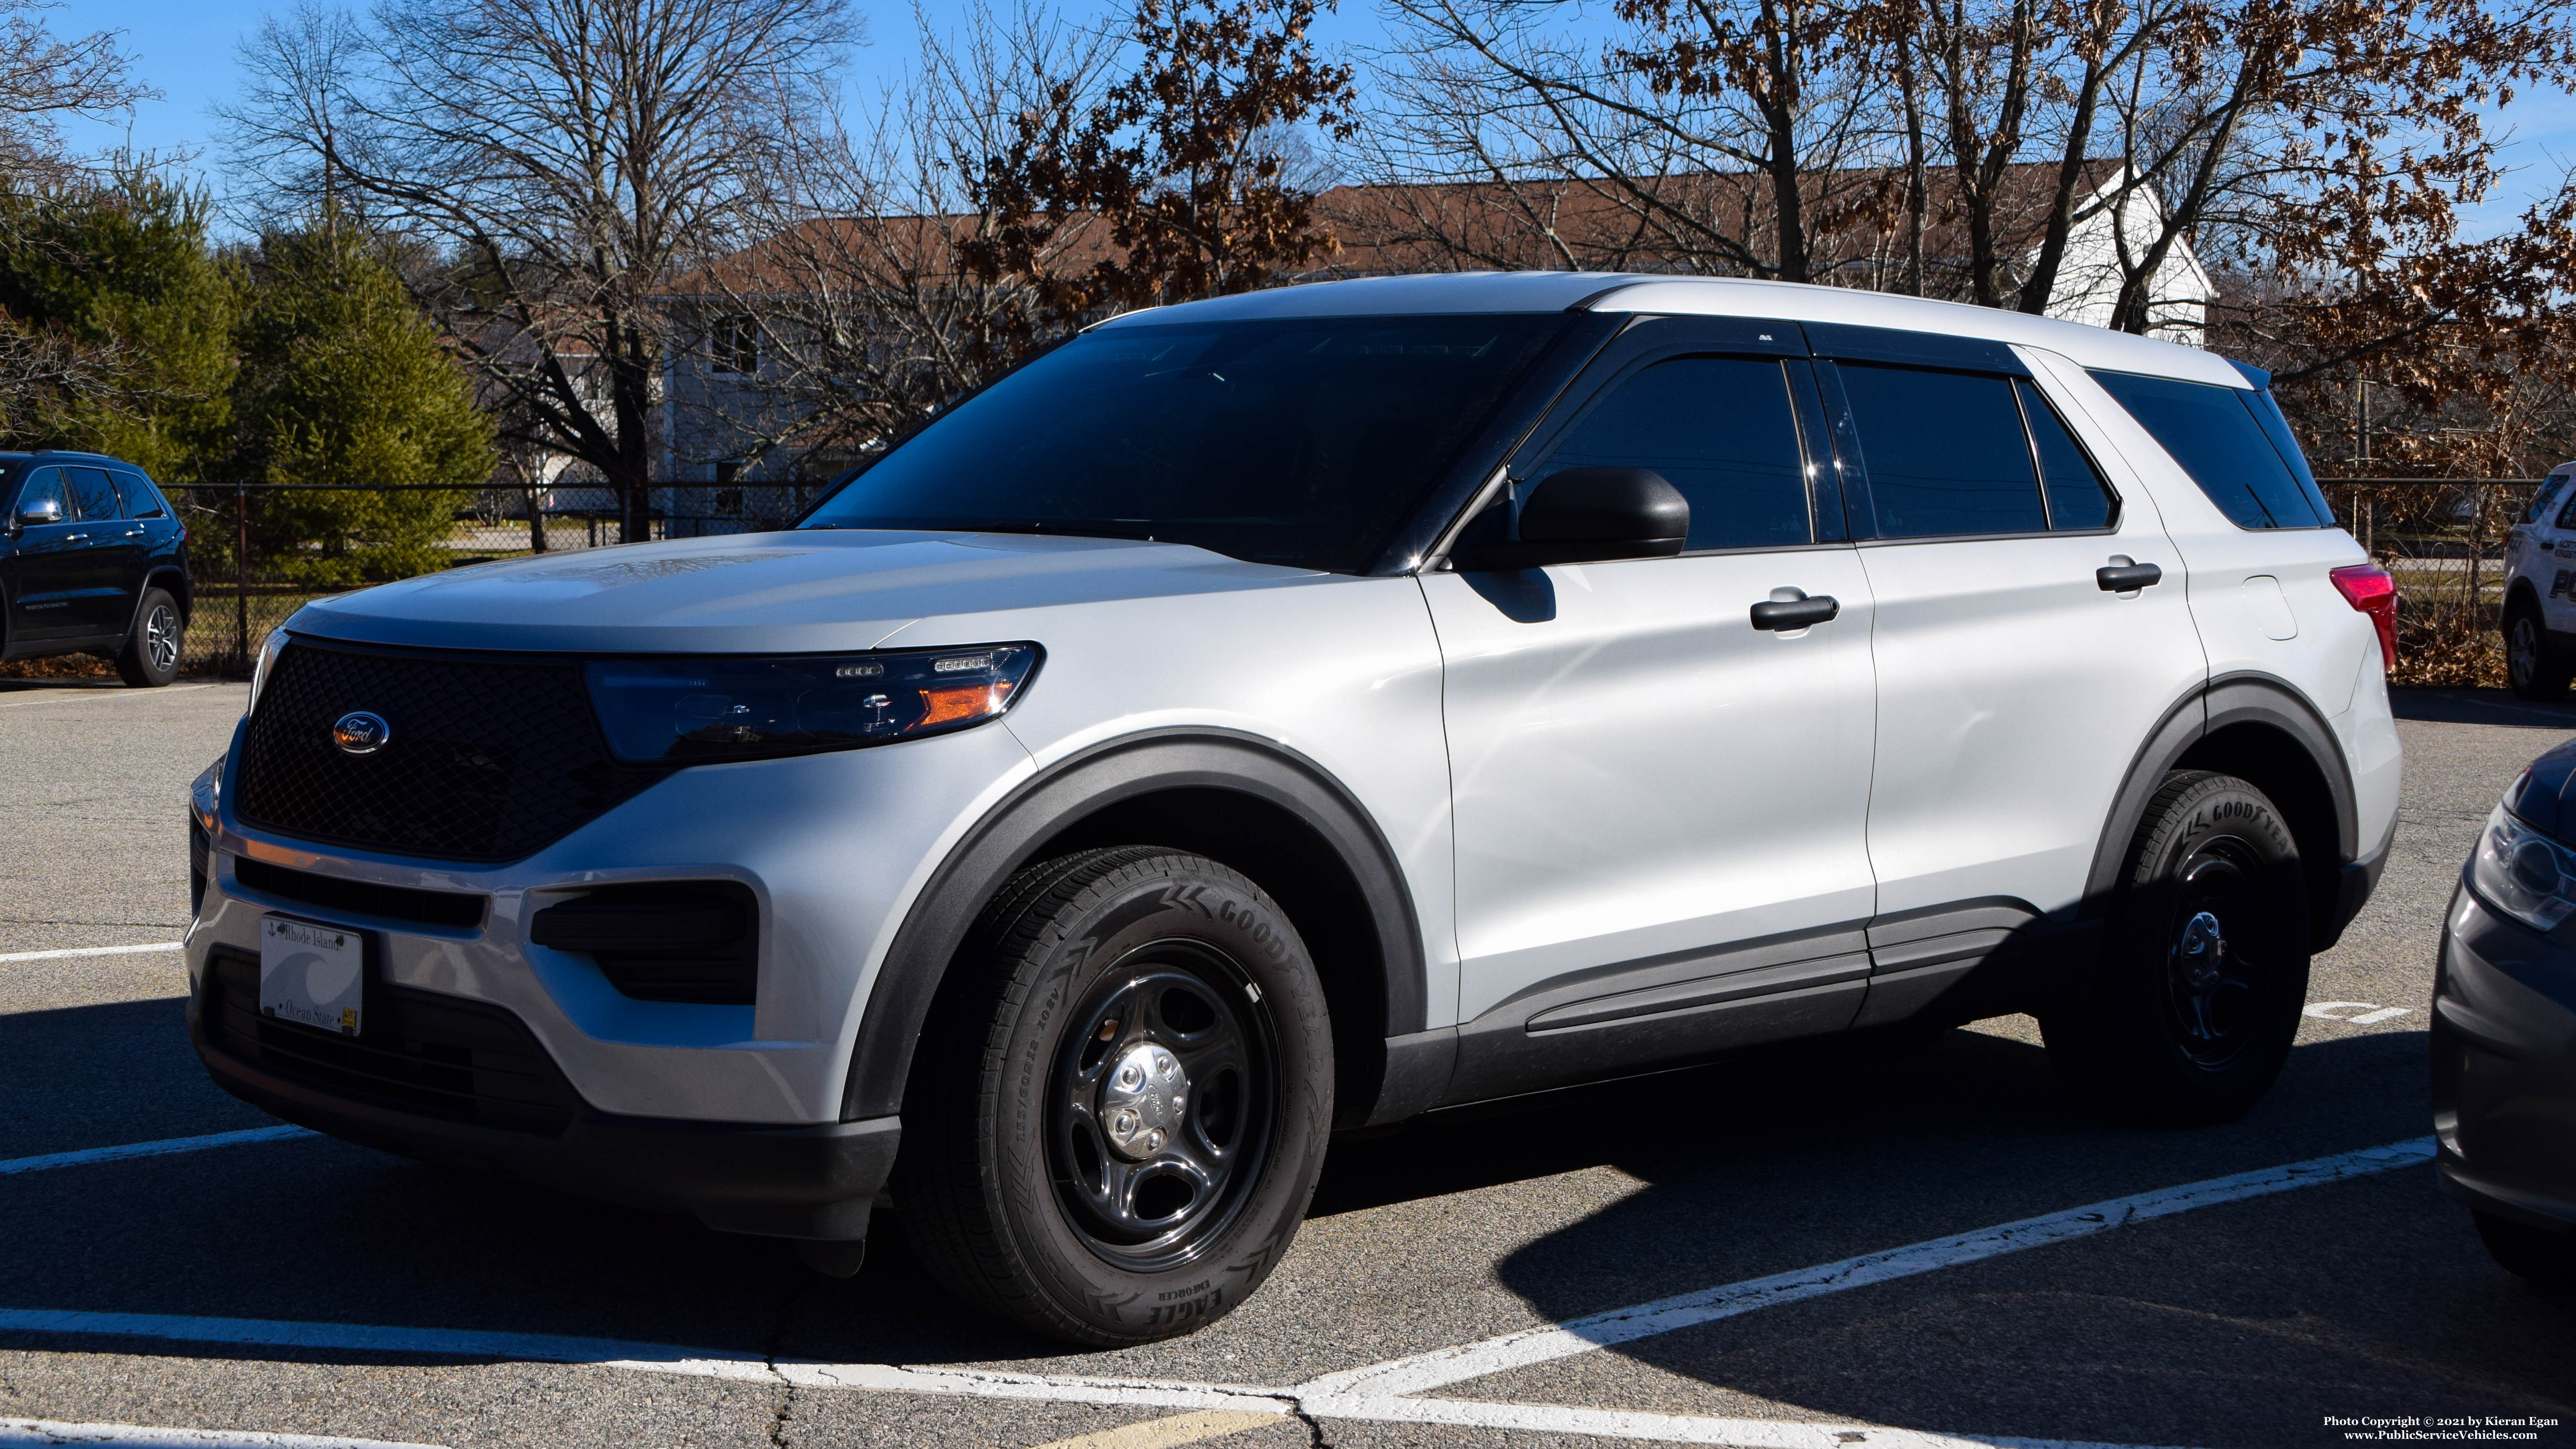 A photo  of North Kingstown Police
            Unmarked Unit, a 2020 Ford Police Interceptor Utility             taken by Kieran Egan